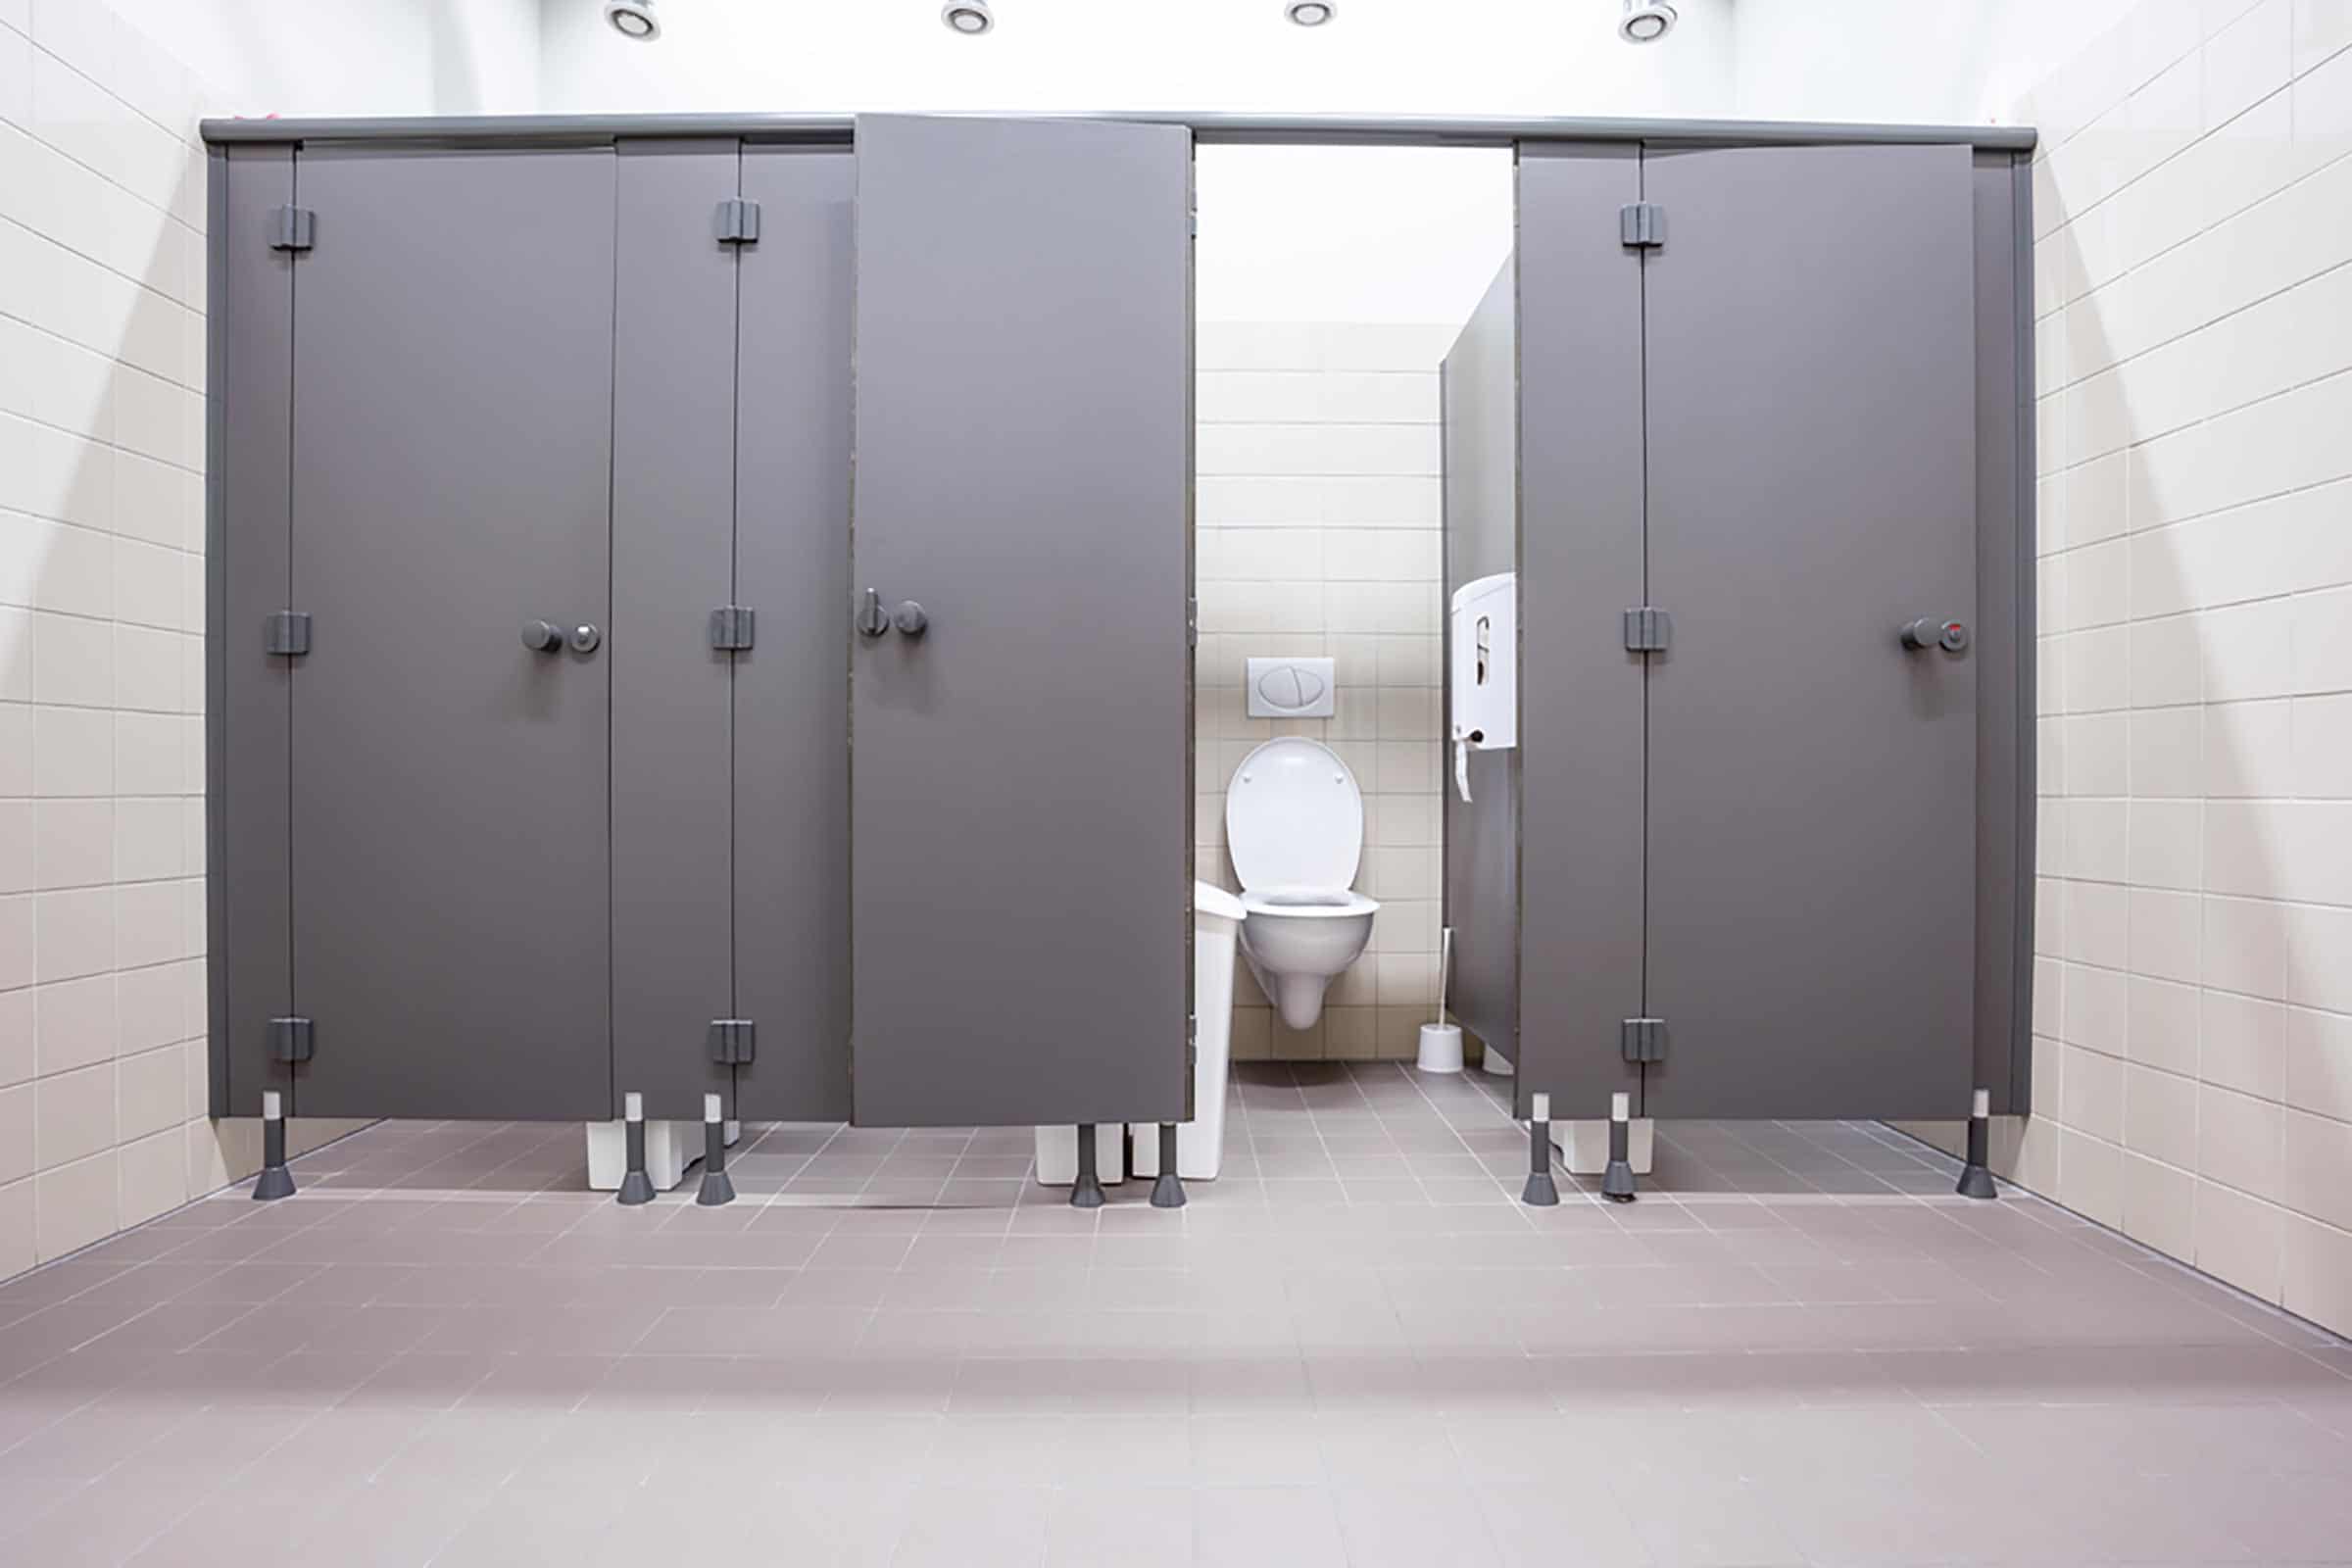 How to Get Your Restroom Stalls Really Clean